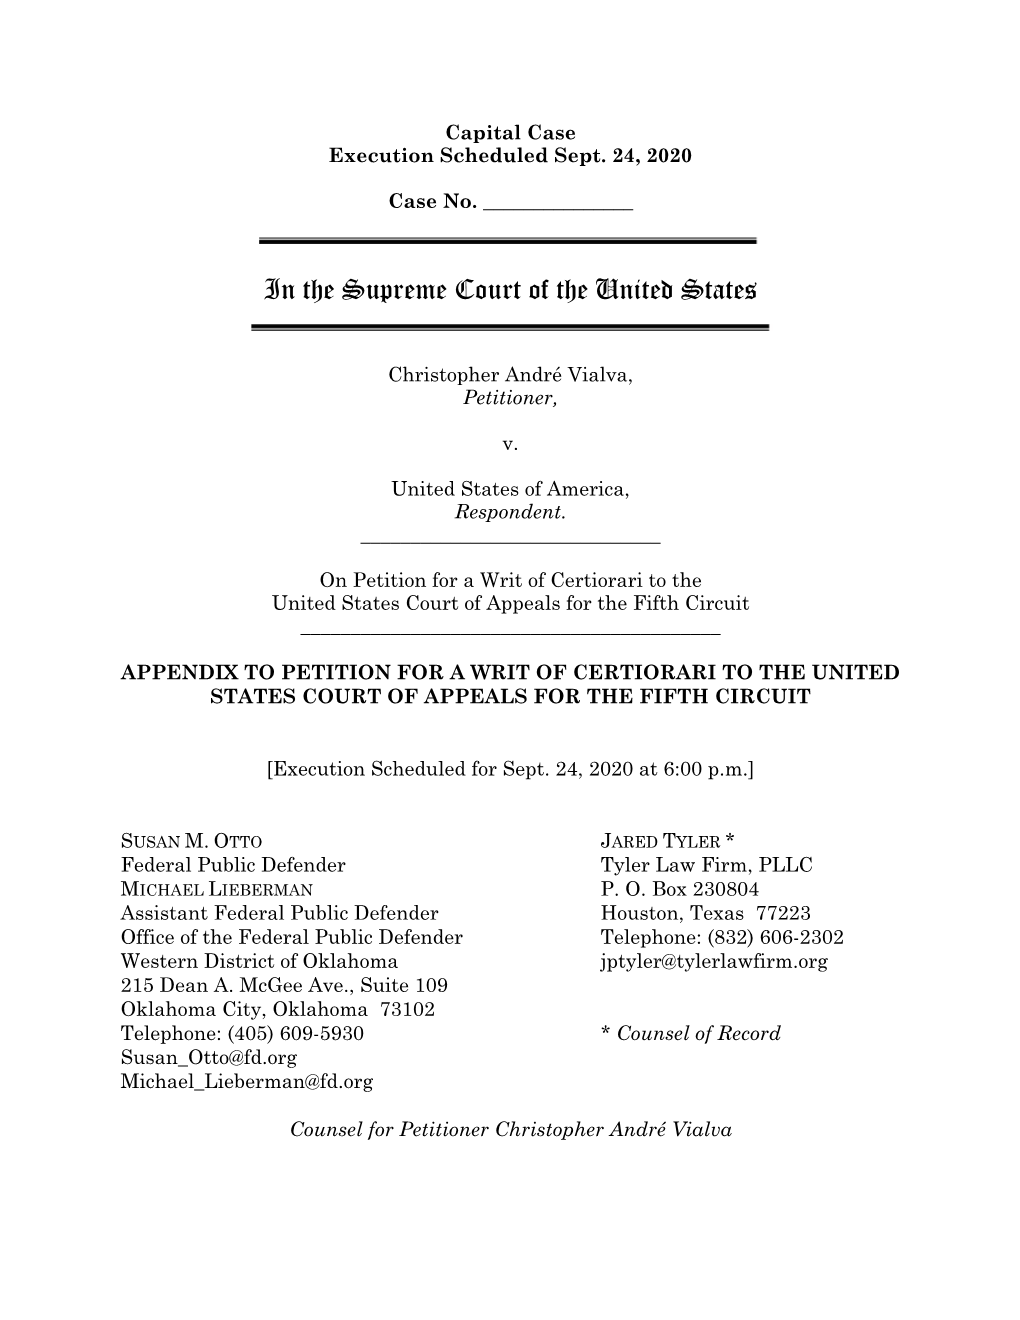 Appendix to Petition for a Writ of Certiorari to the United States Court of Appeals for the Fifth Circuit